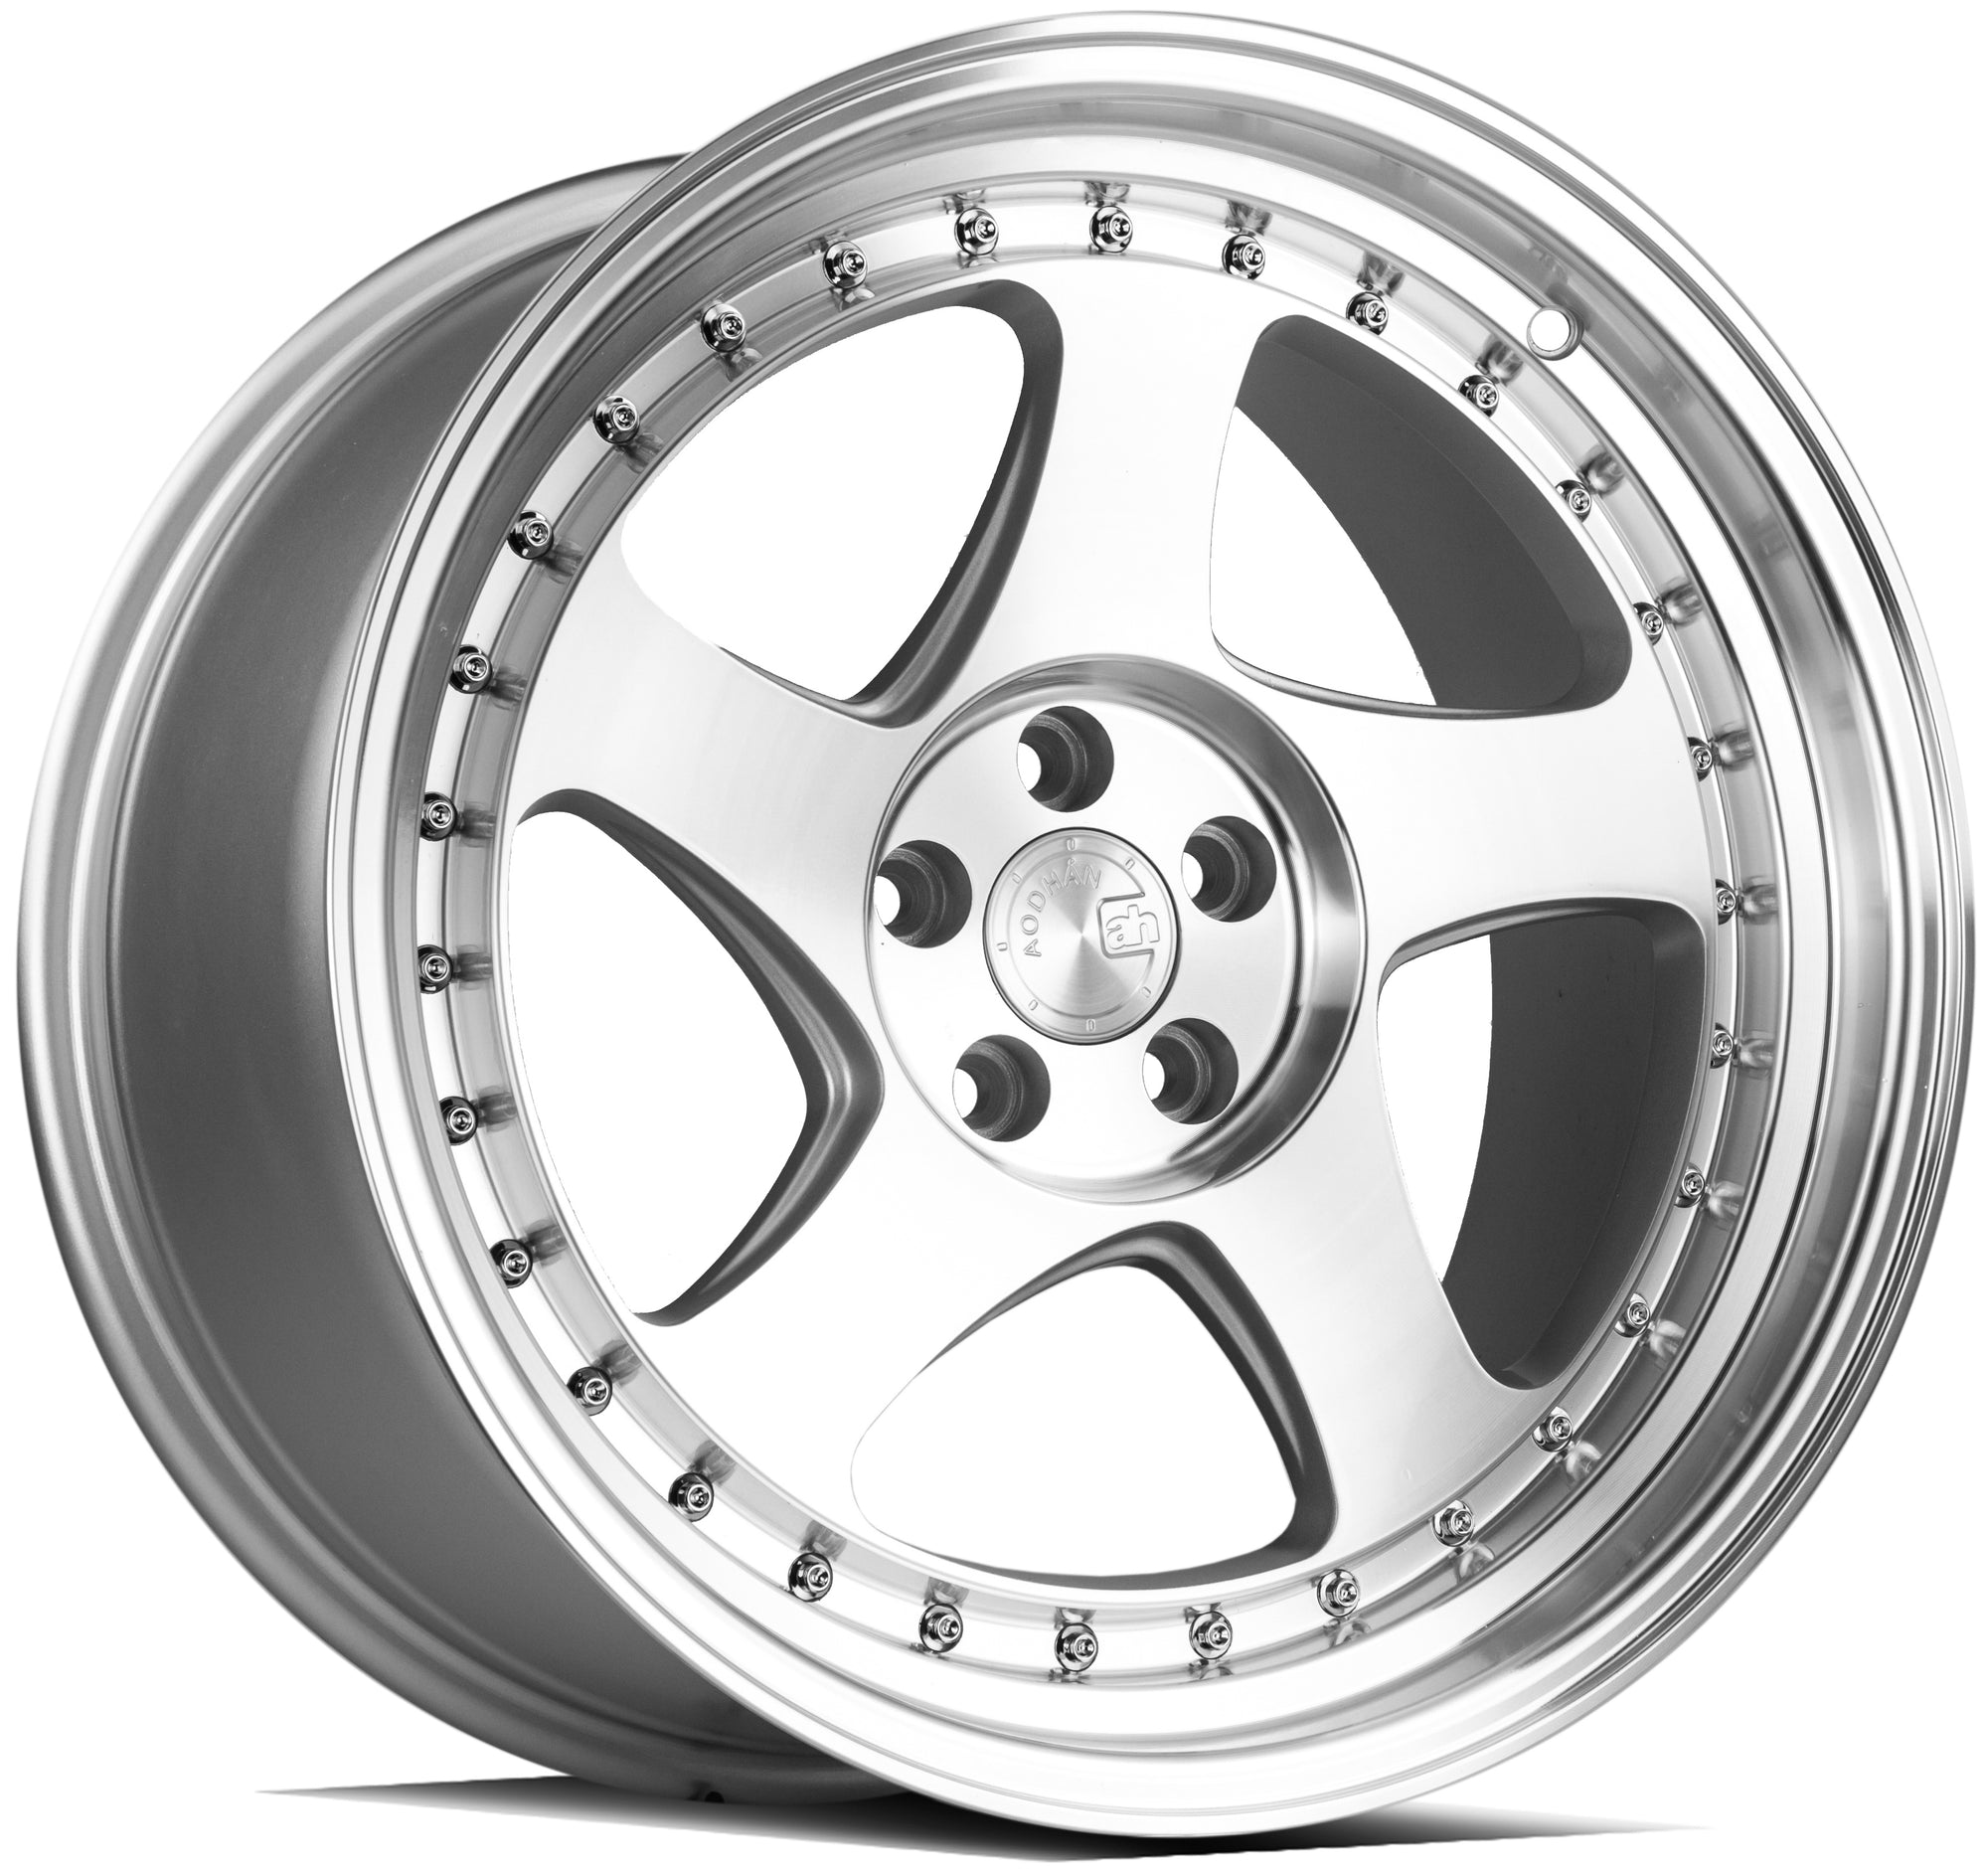 Aodhan AH01 18x9.5 5x114.3 +12 Silver Machined Face And Lip